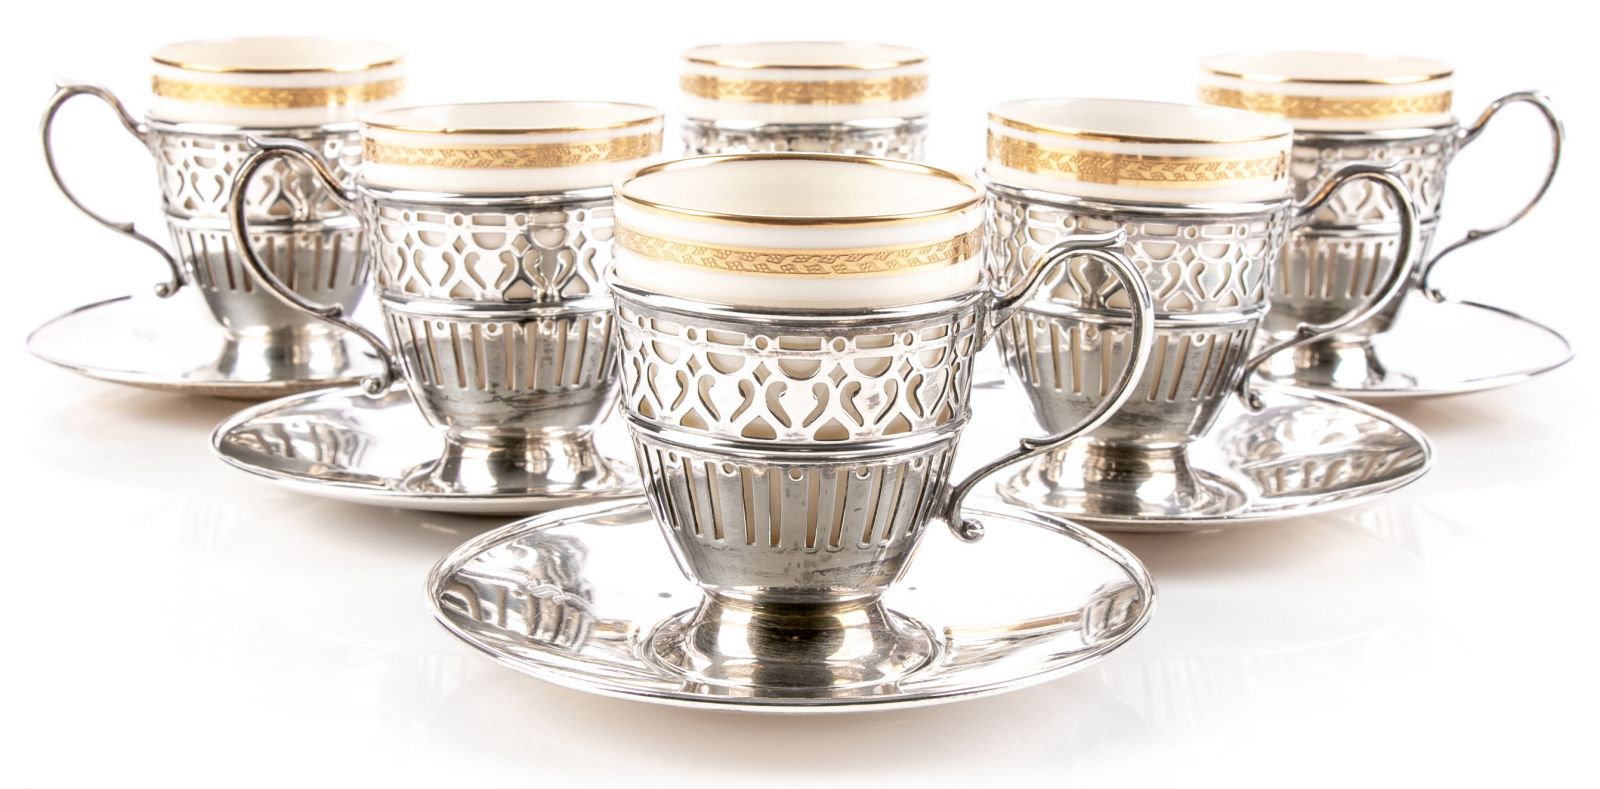 SIX TIFFANY STERLING SILVER HOLDERS WITH LENOX PORCELAIN CUPS